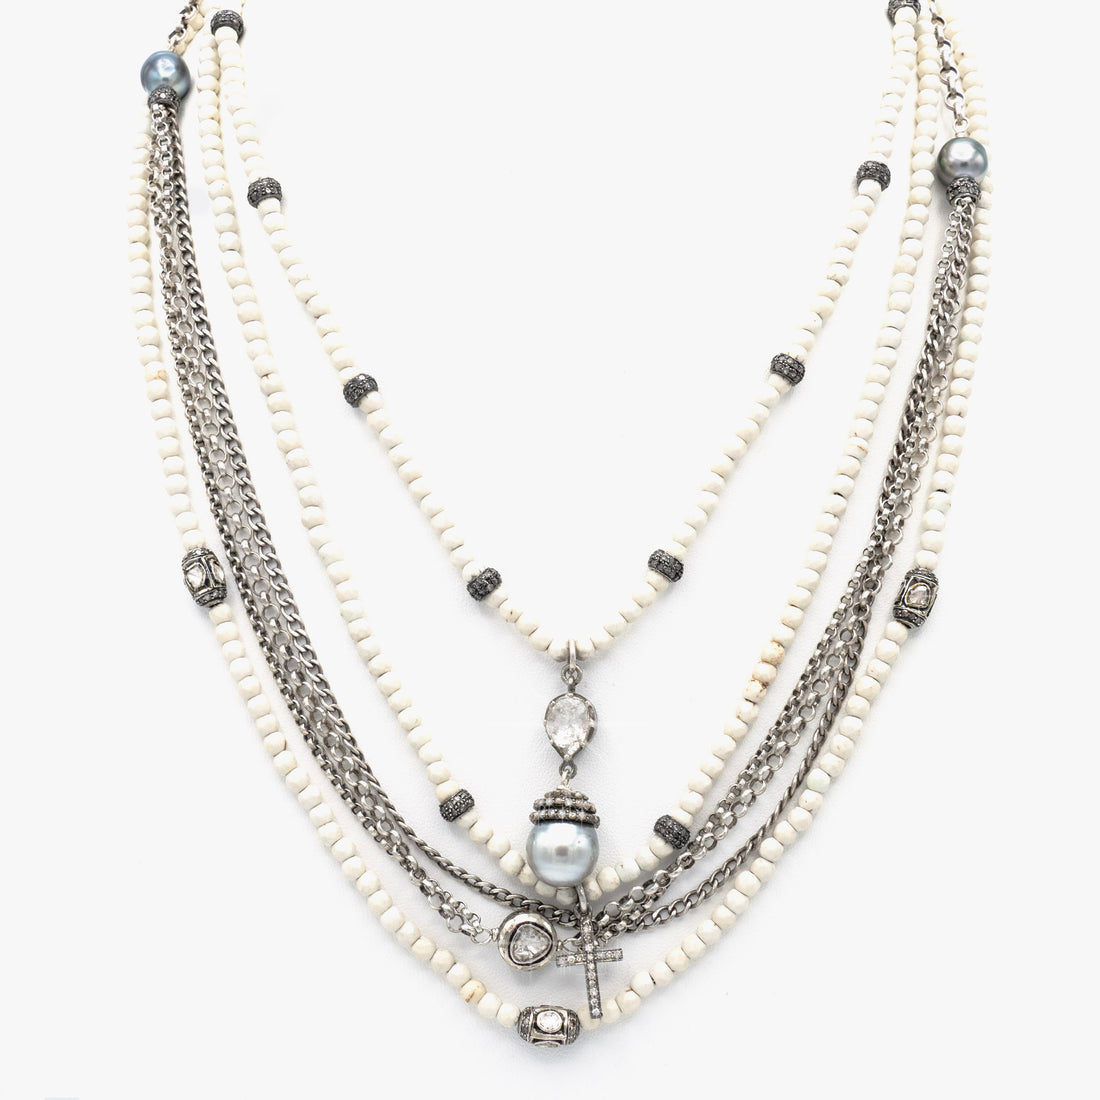 AM Studio Beaded Necklace WIth Tahitian Pearl